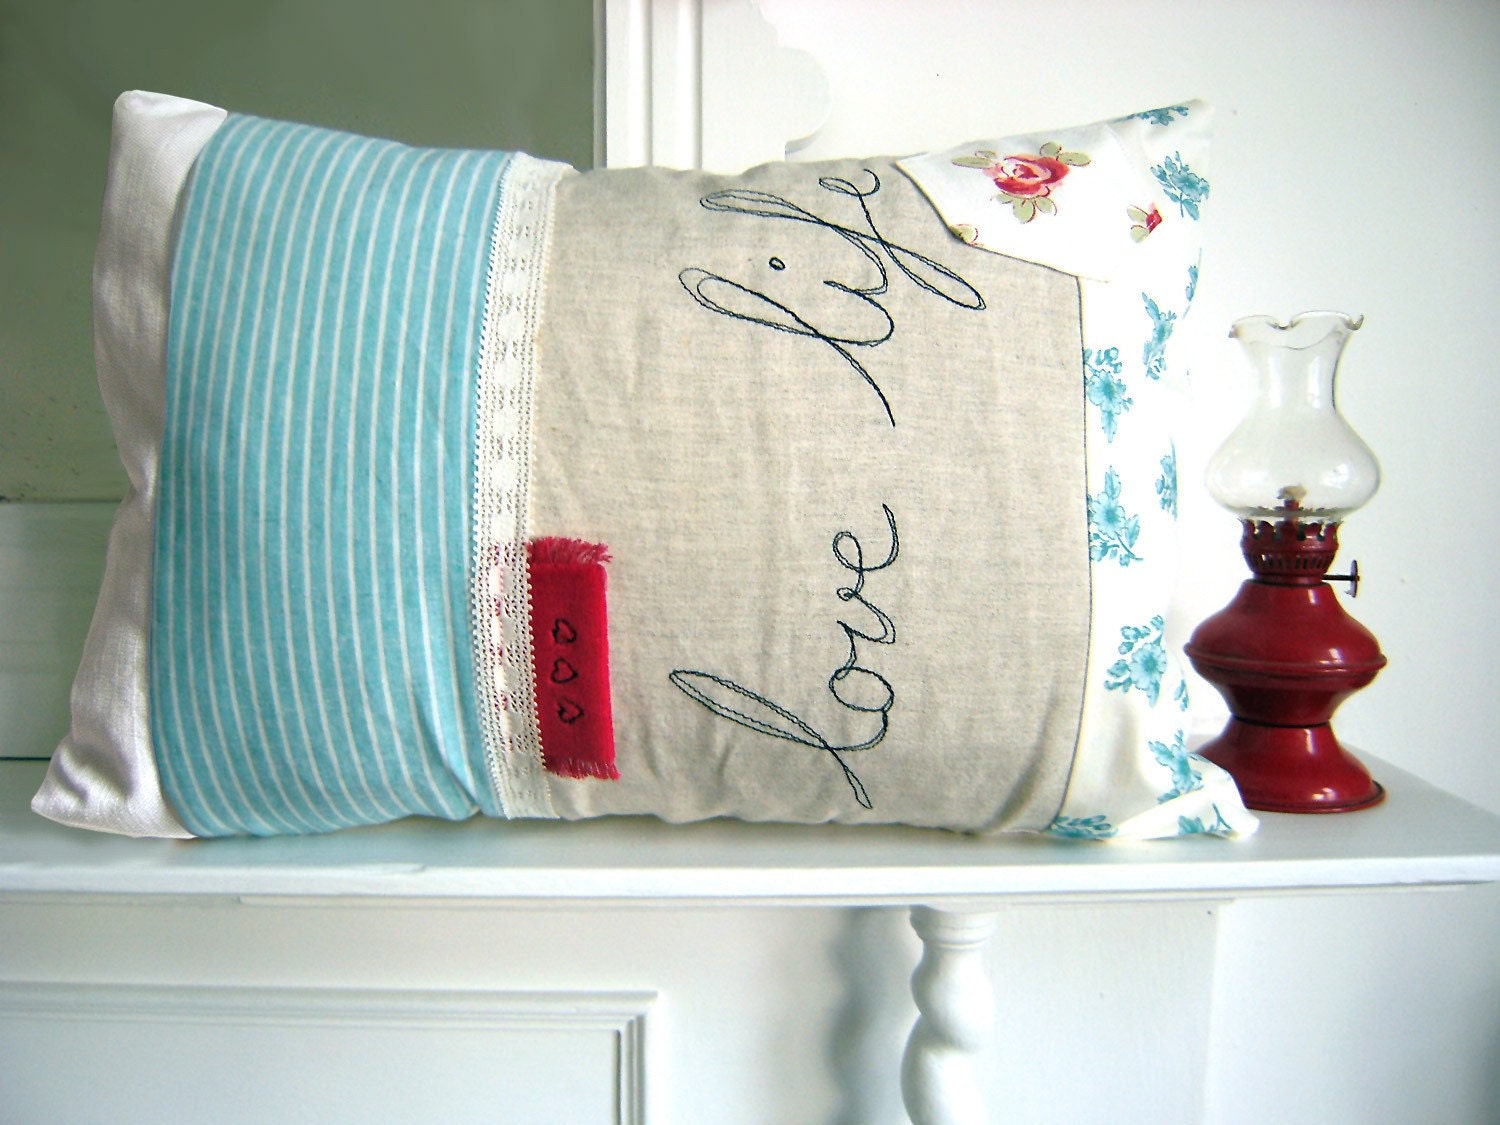 Embroidered Pillow Cover - 'Love life' cushion in turquoise and scarlet red 16 x 12